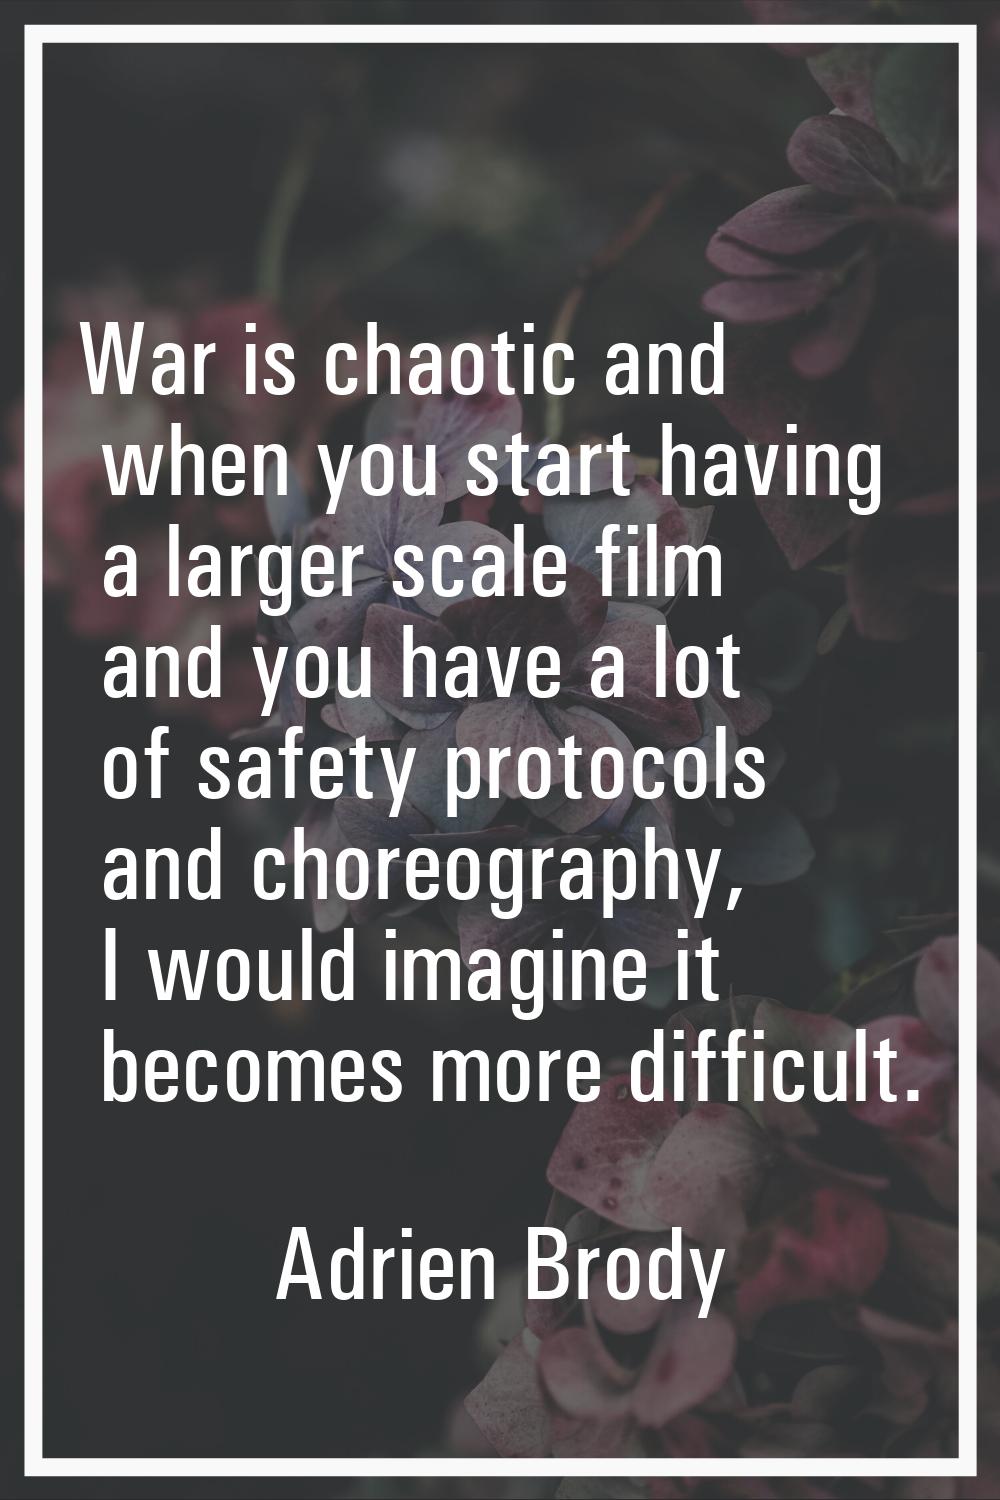 War is chaotic and when you start having a larger scale film and you have a lot of safety protocols